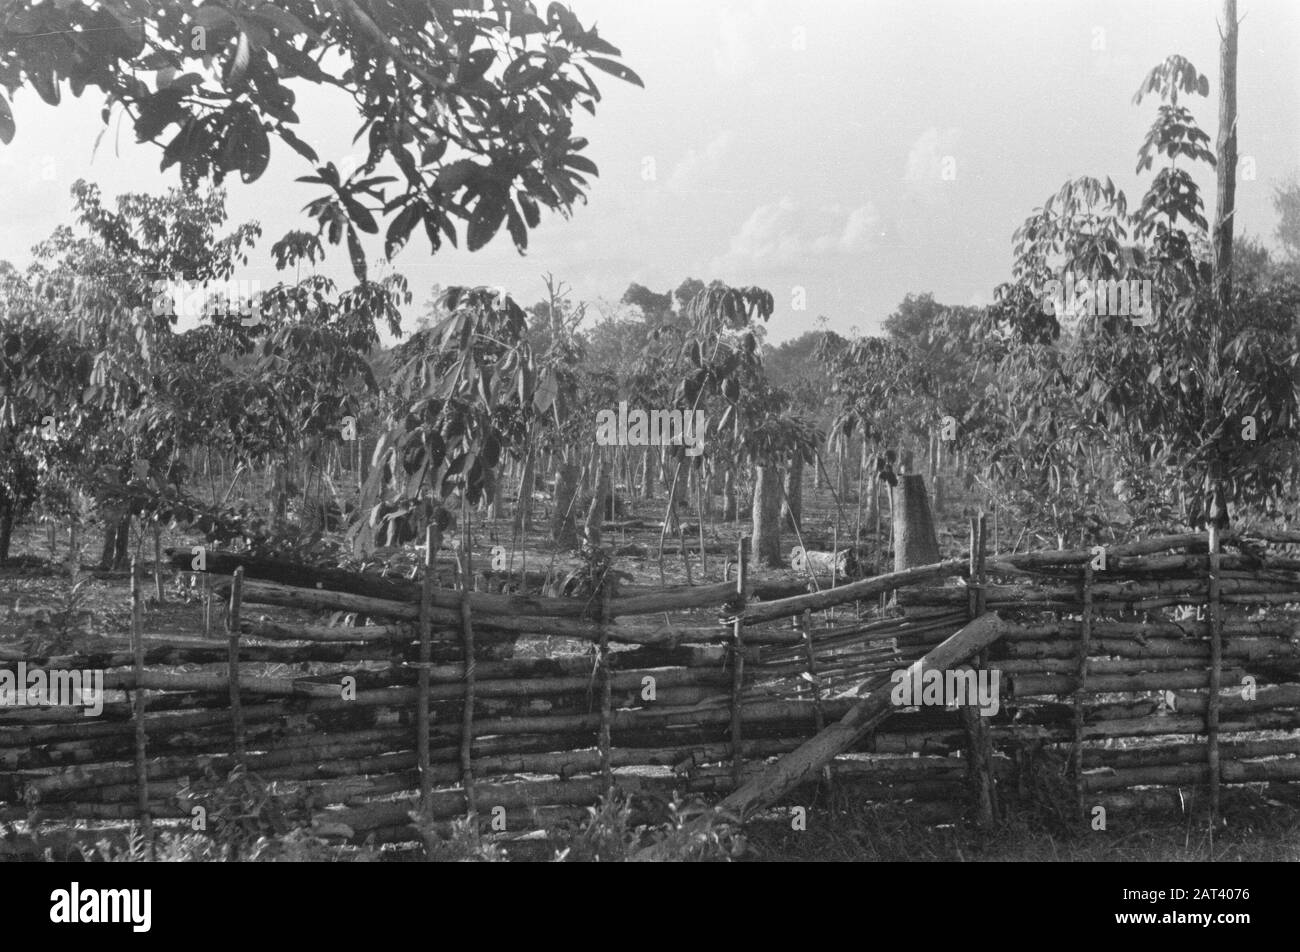 Palembangs  In the plantations the usury plants are ramped. The Republicans cut down the rubber trees Date: 23 July 1947 Location: Baturadja, Indonesia, Dutch East Indies, Sumatra Stock Photo